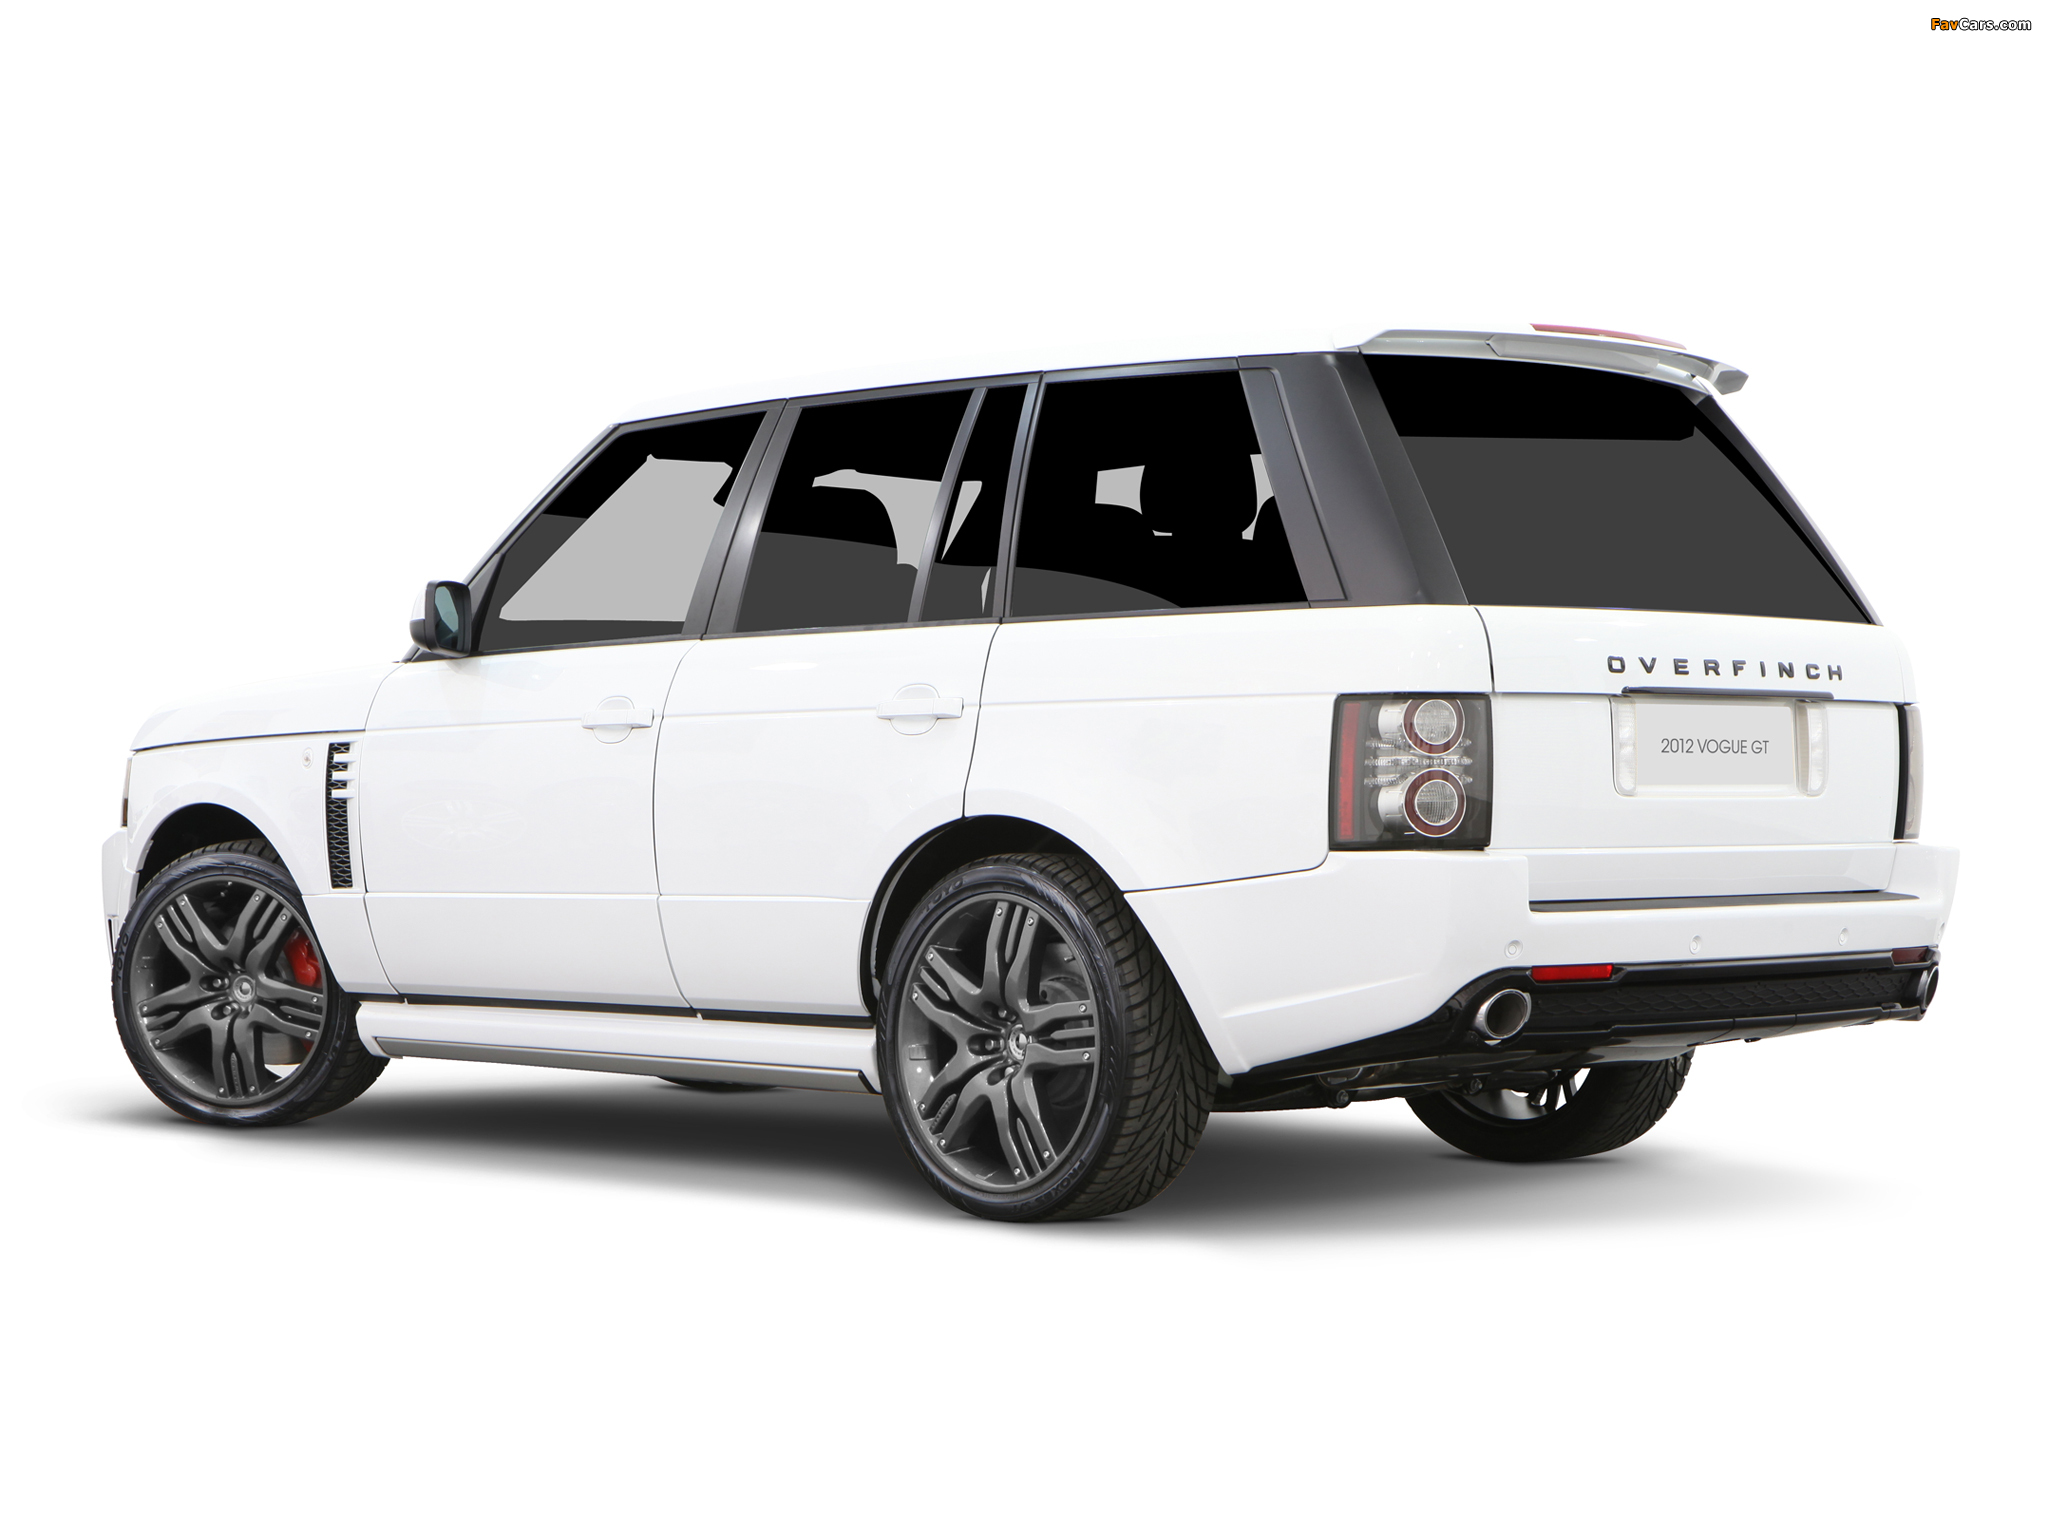 Overfinch Range Rover Vogue GT (L322) 2012 images (2048 x 1536)